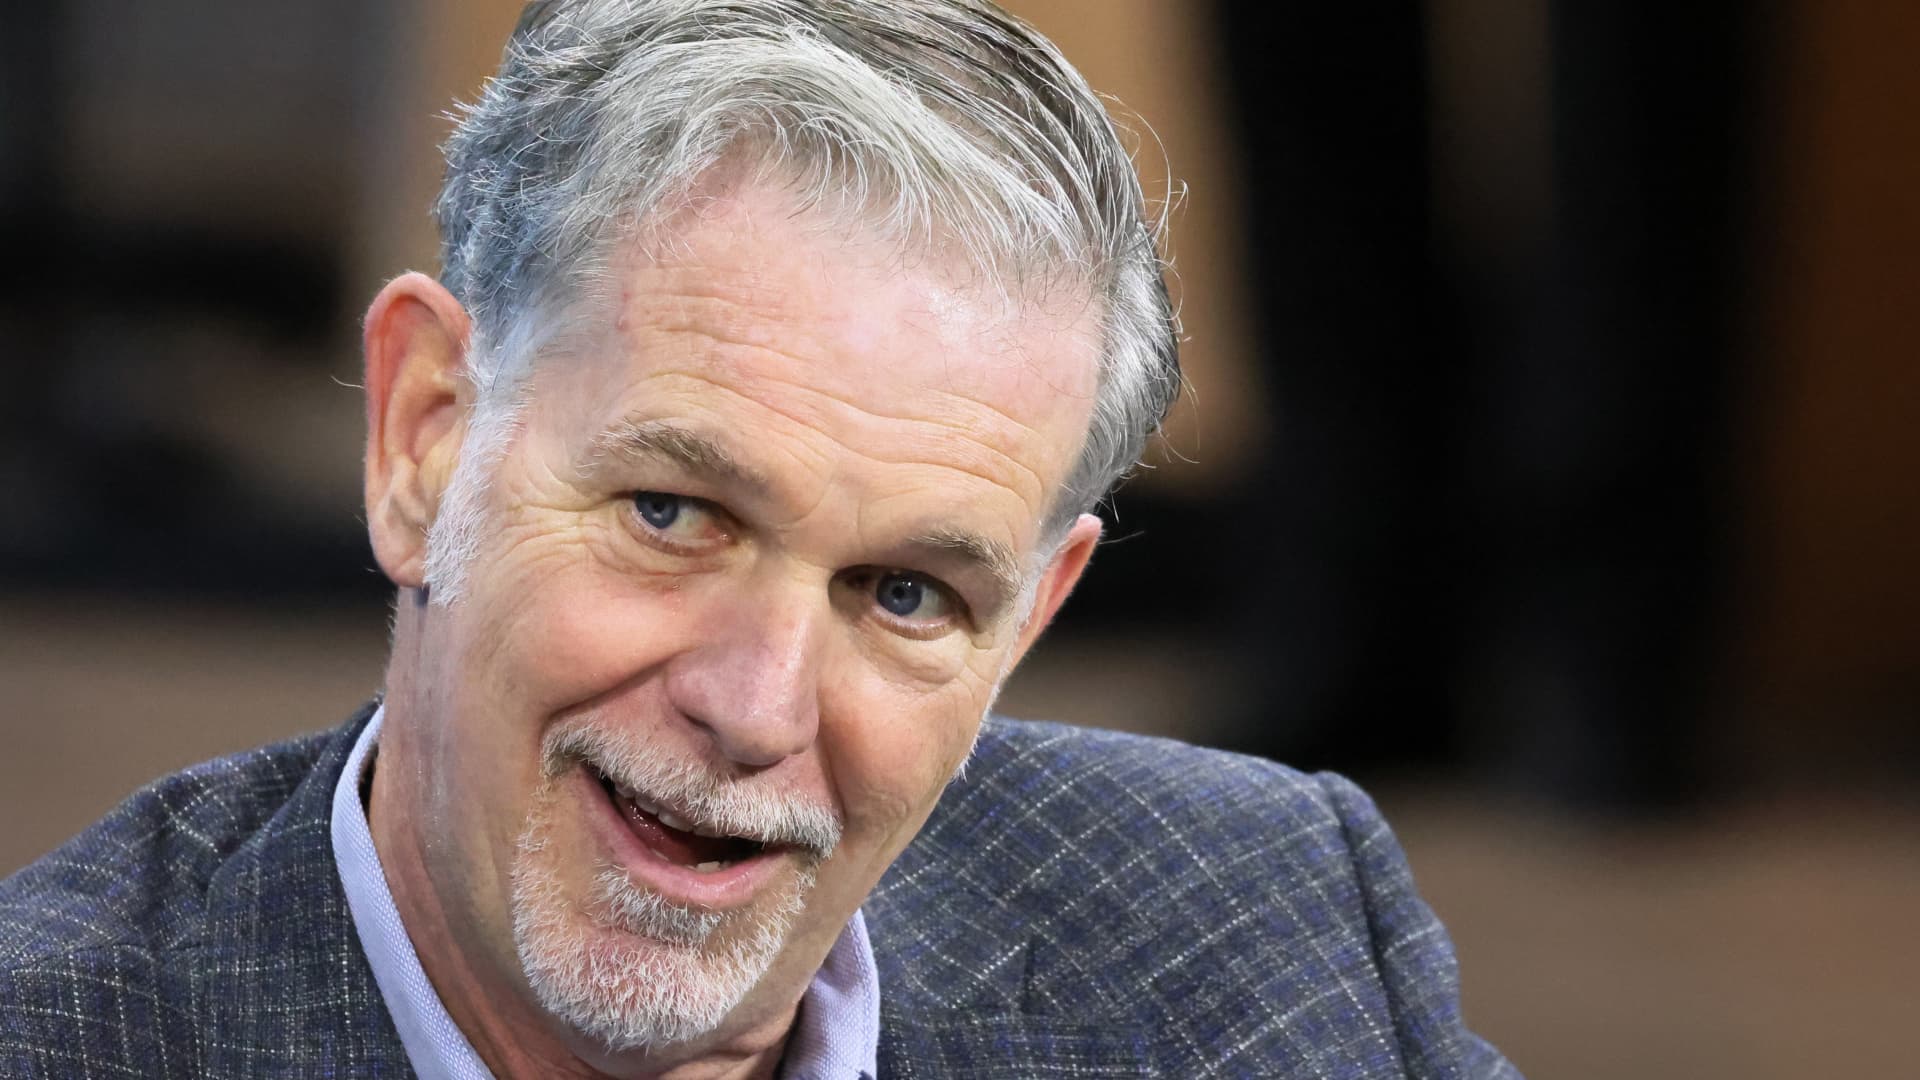 Reed Hastings sells $1.1 billion in Netflix shares